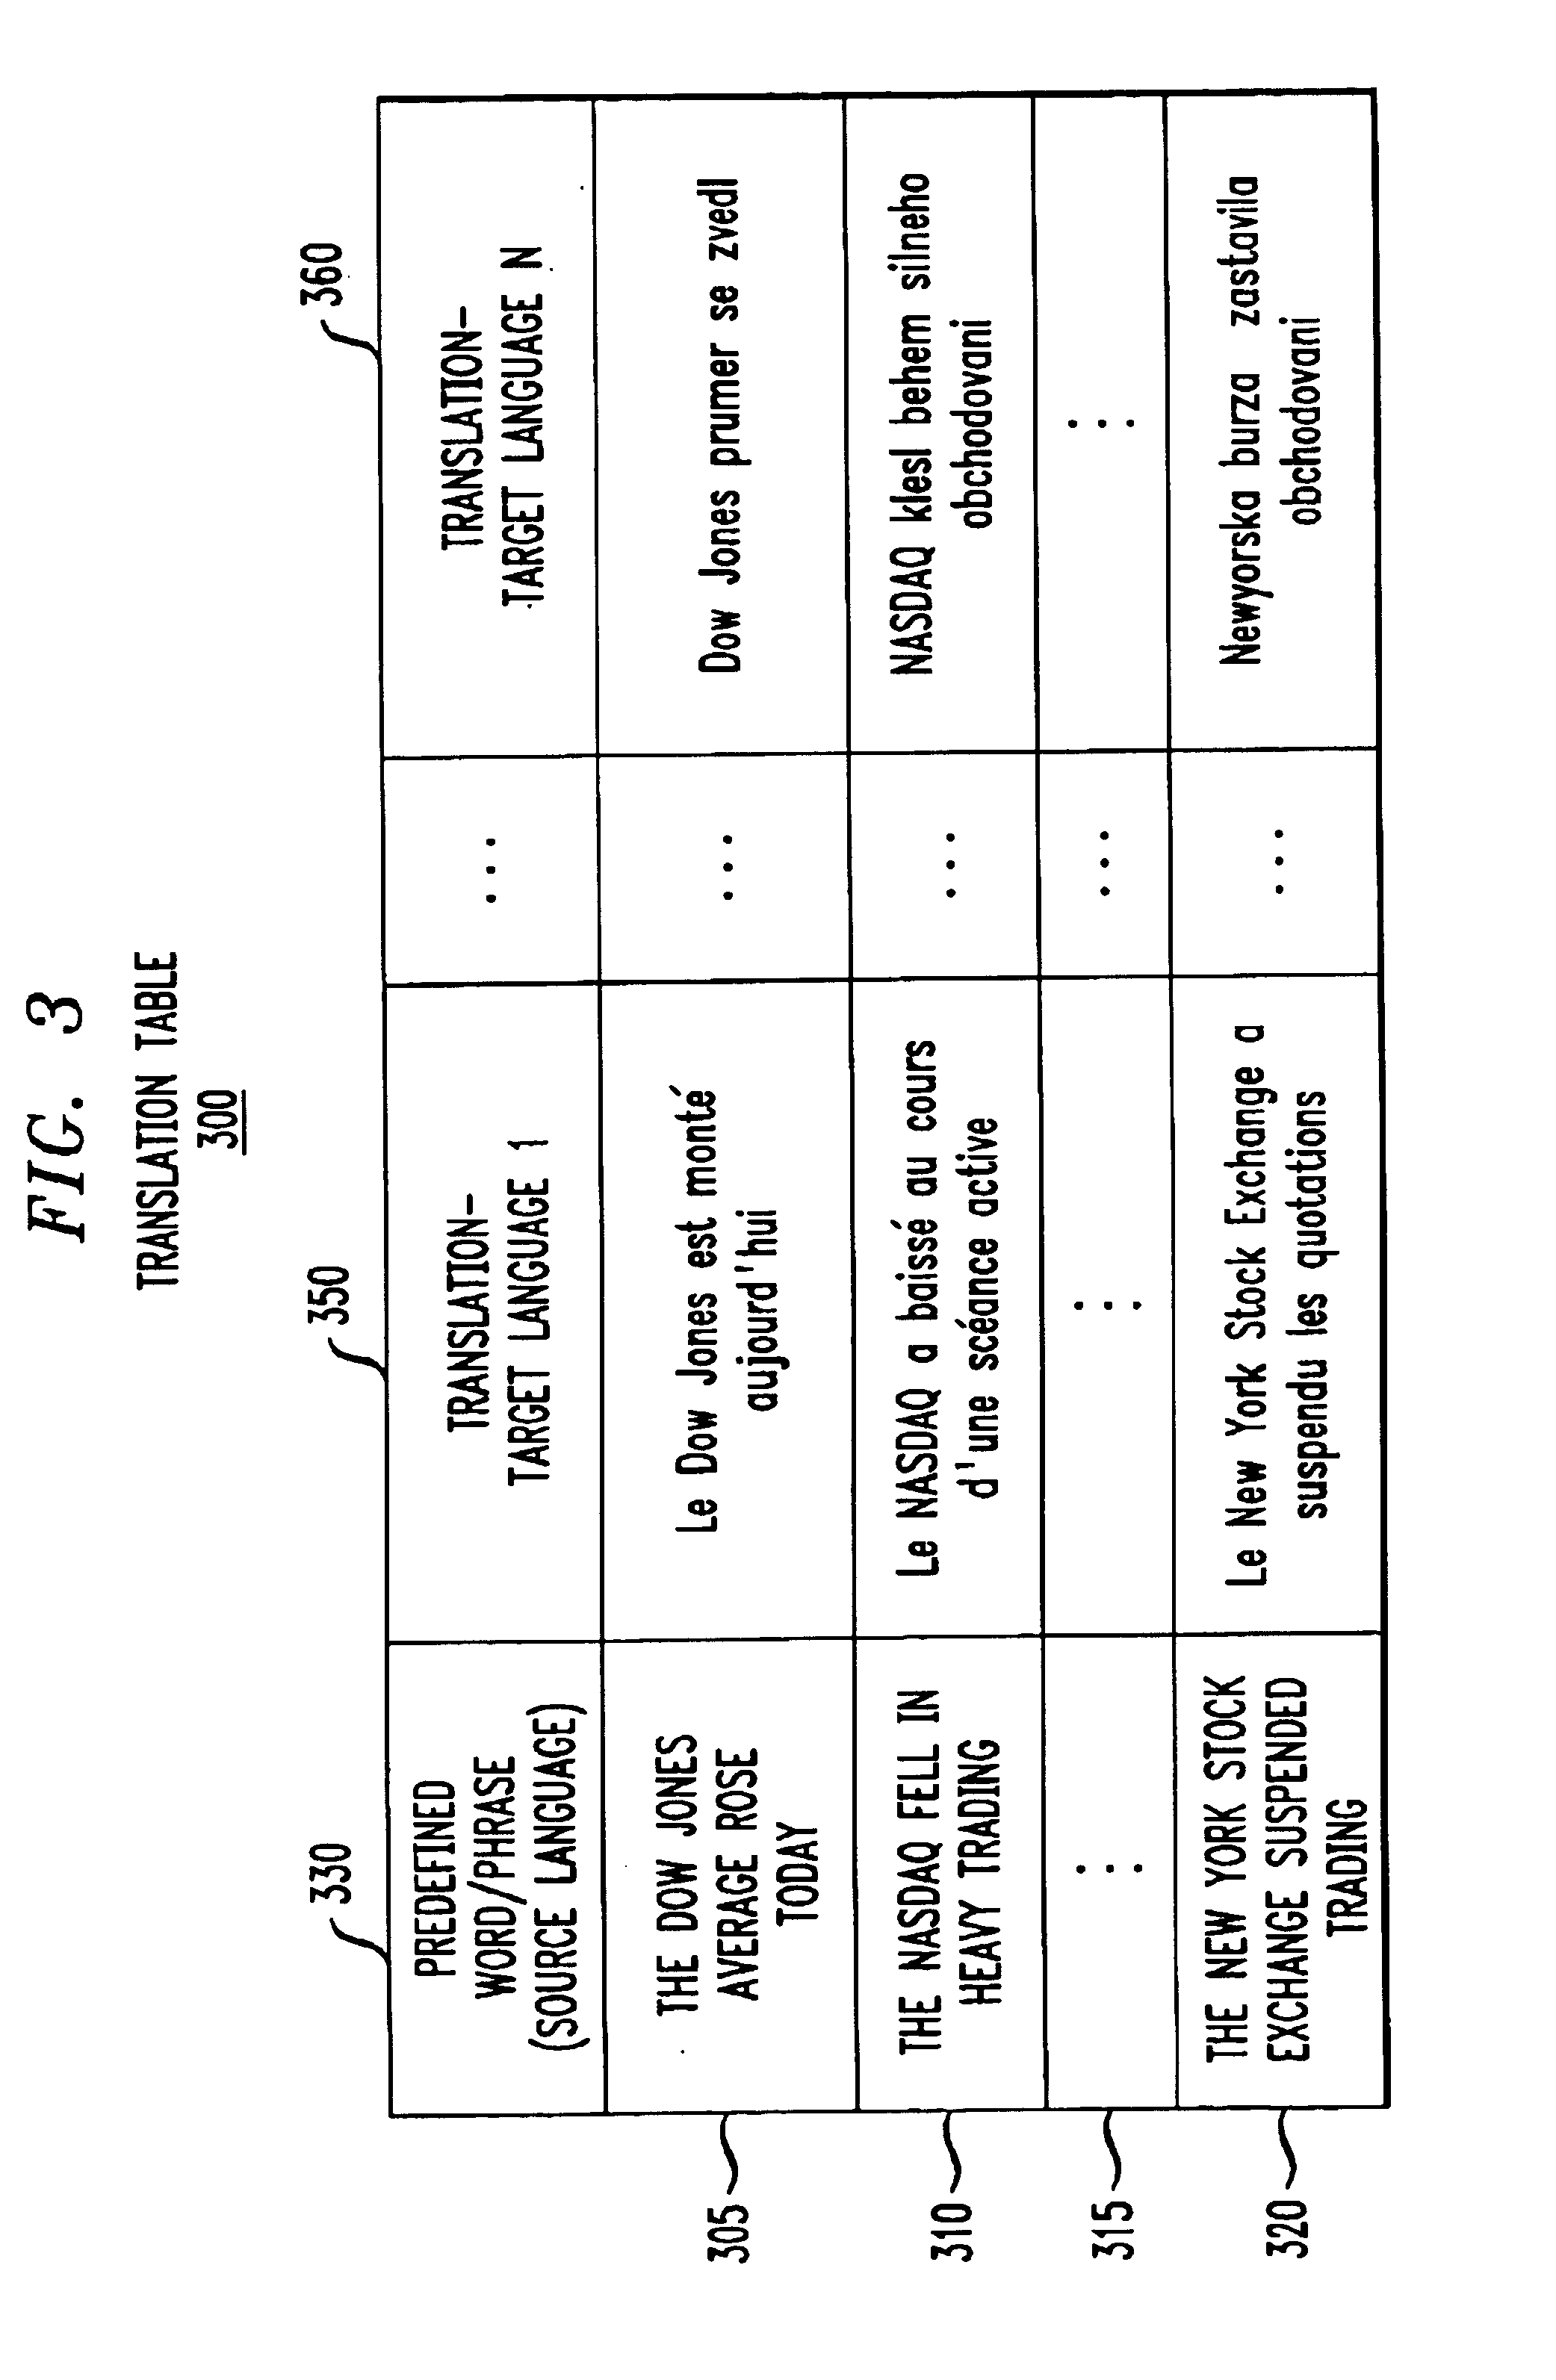 Method and apparatus for translating natural-language speech using multiple output phrases